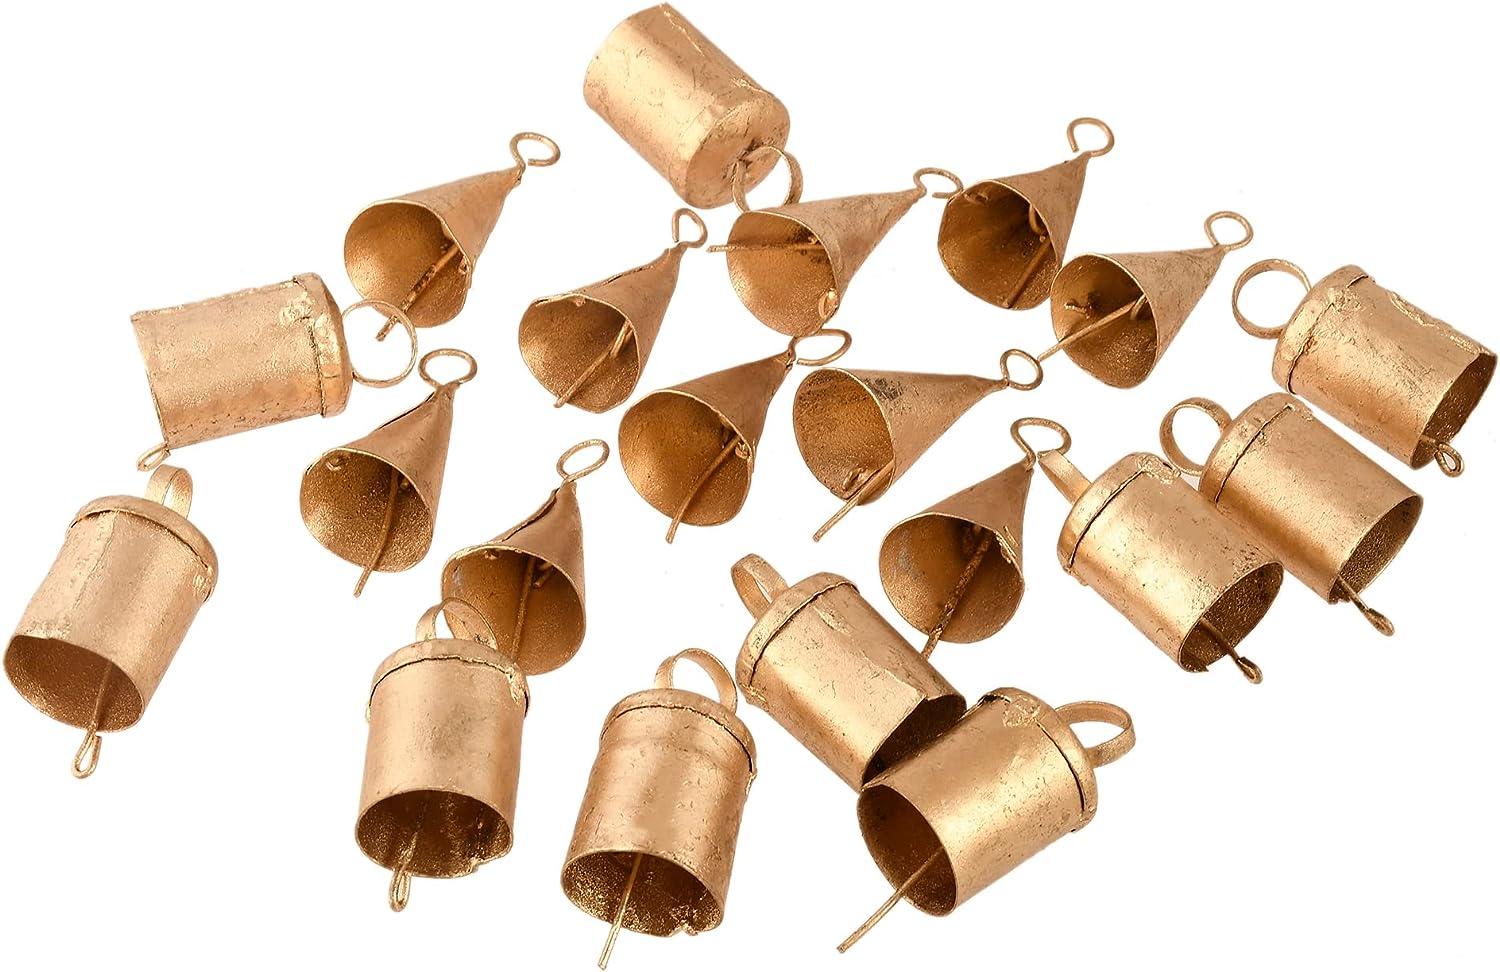 KRATI EXPORTS Barn Bells in Small Sizes- 20 Distinctive Golden Rustic Bells  - Full of Beautiful Rough Hewn Variations - Perfect for Home Decor  Christmas Jingle Bells